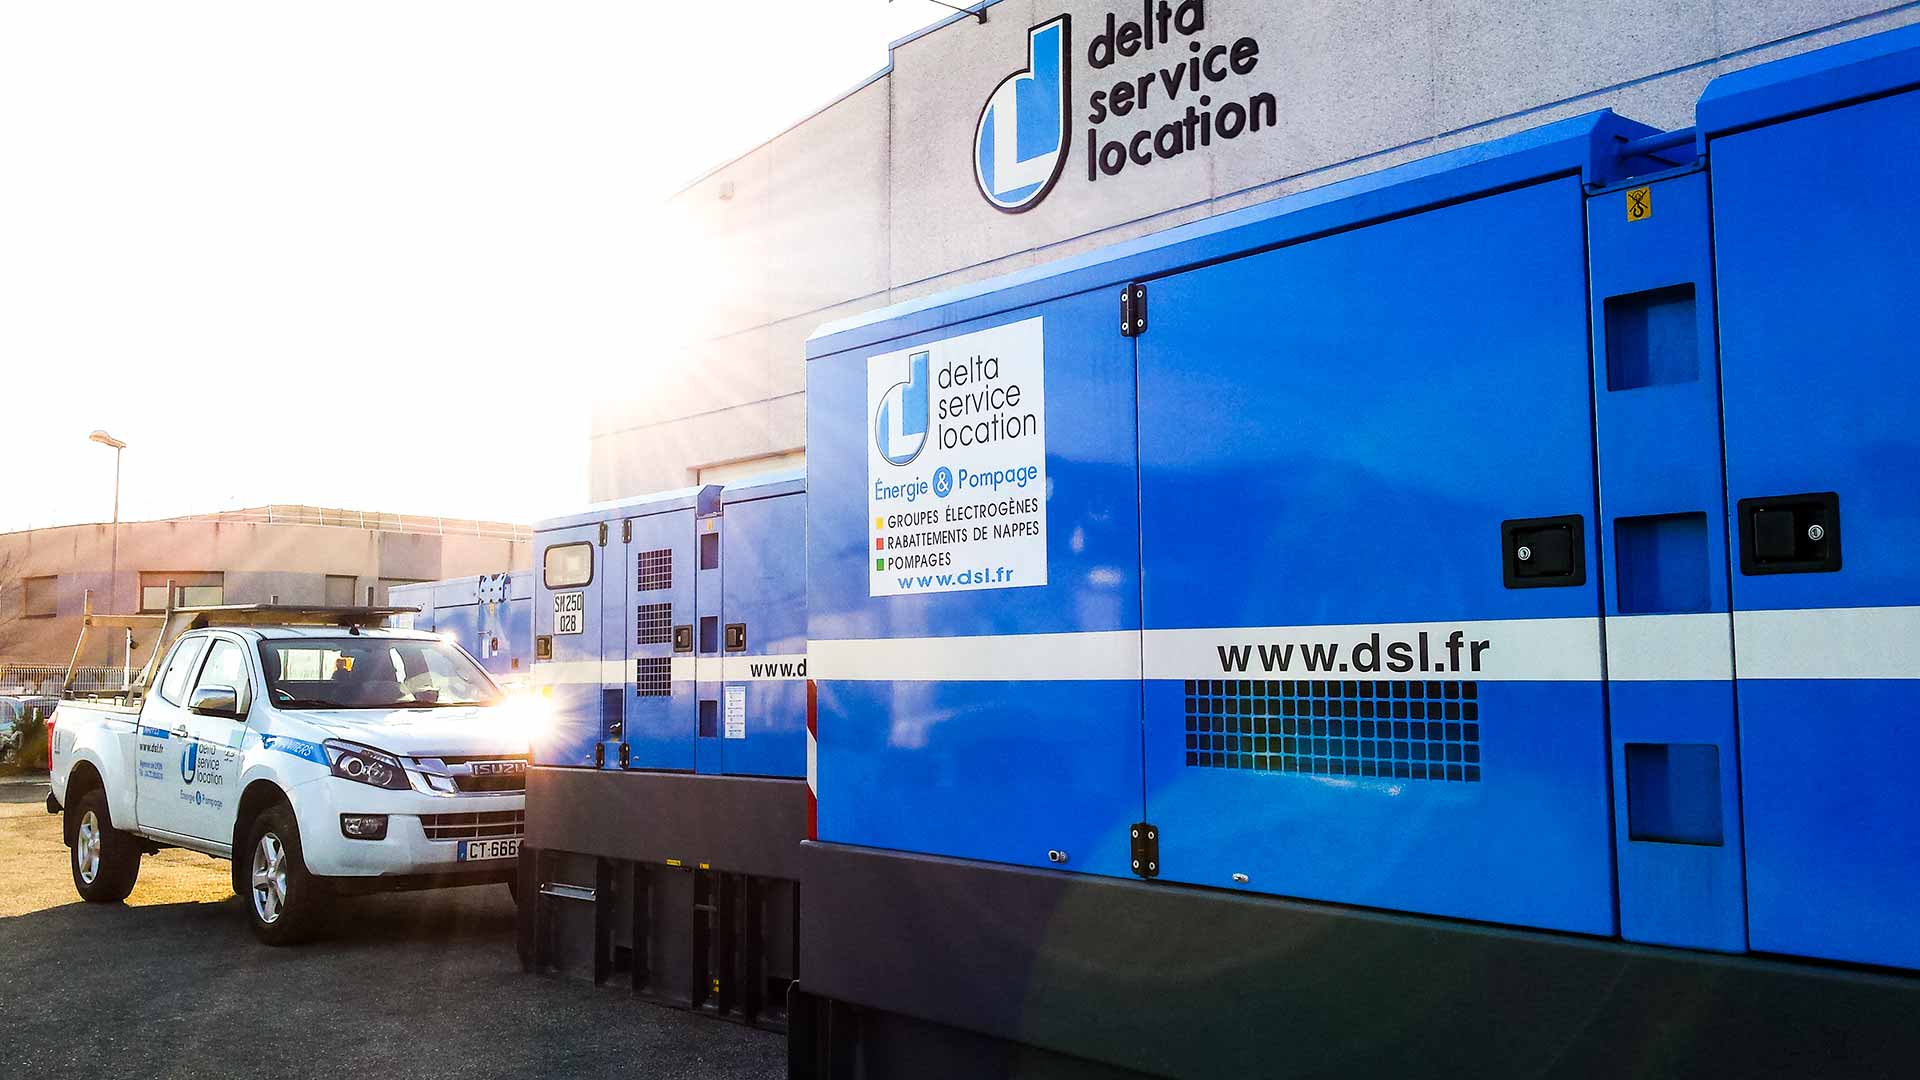 Founded in 1980 by Michel Denis, Delta Service Location (DSL) is a pioneer in the rental of pumping equipment and generators for the construction, energy and industrial maintenance sectors.